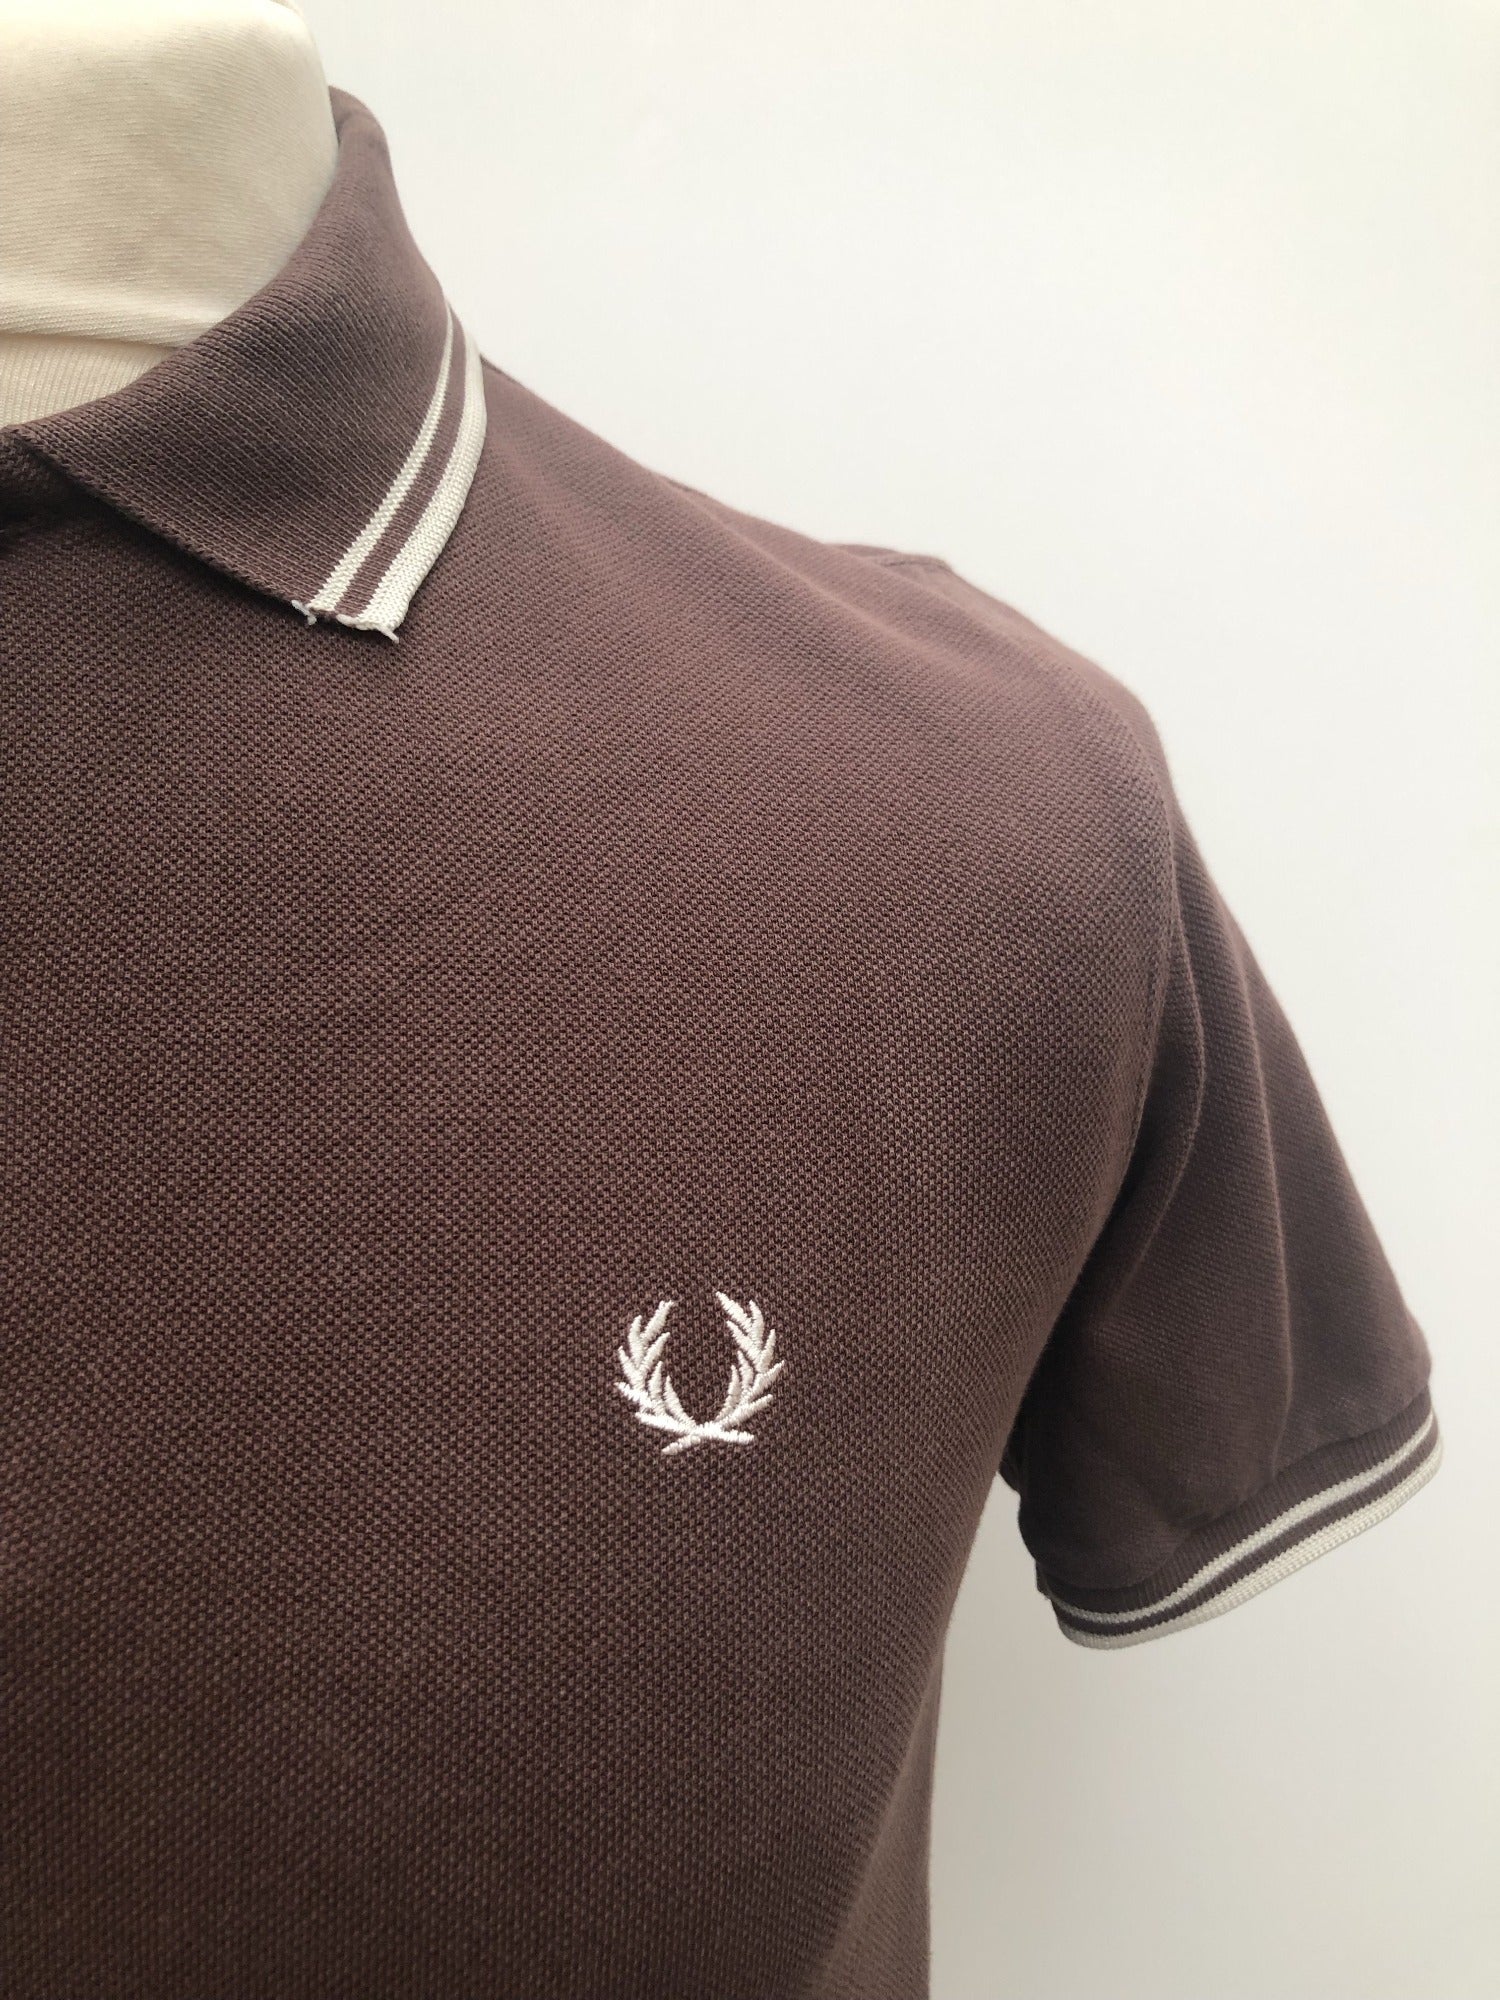 vintage  Urban Village Vintage  urban village  summer  Shirt  polo top  polo  Mens Shirts  mens  L  Fred Perry  comped cotton  brown